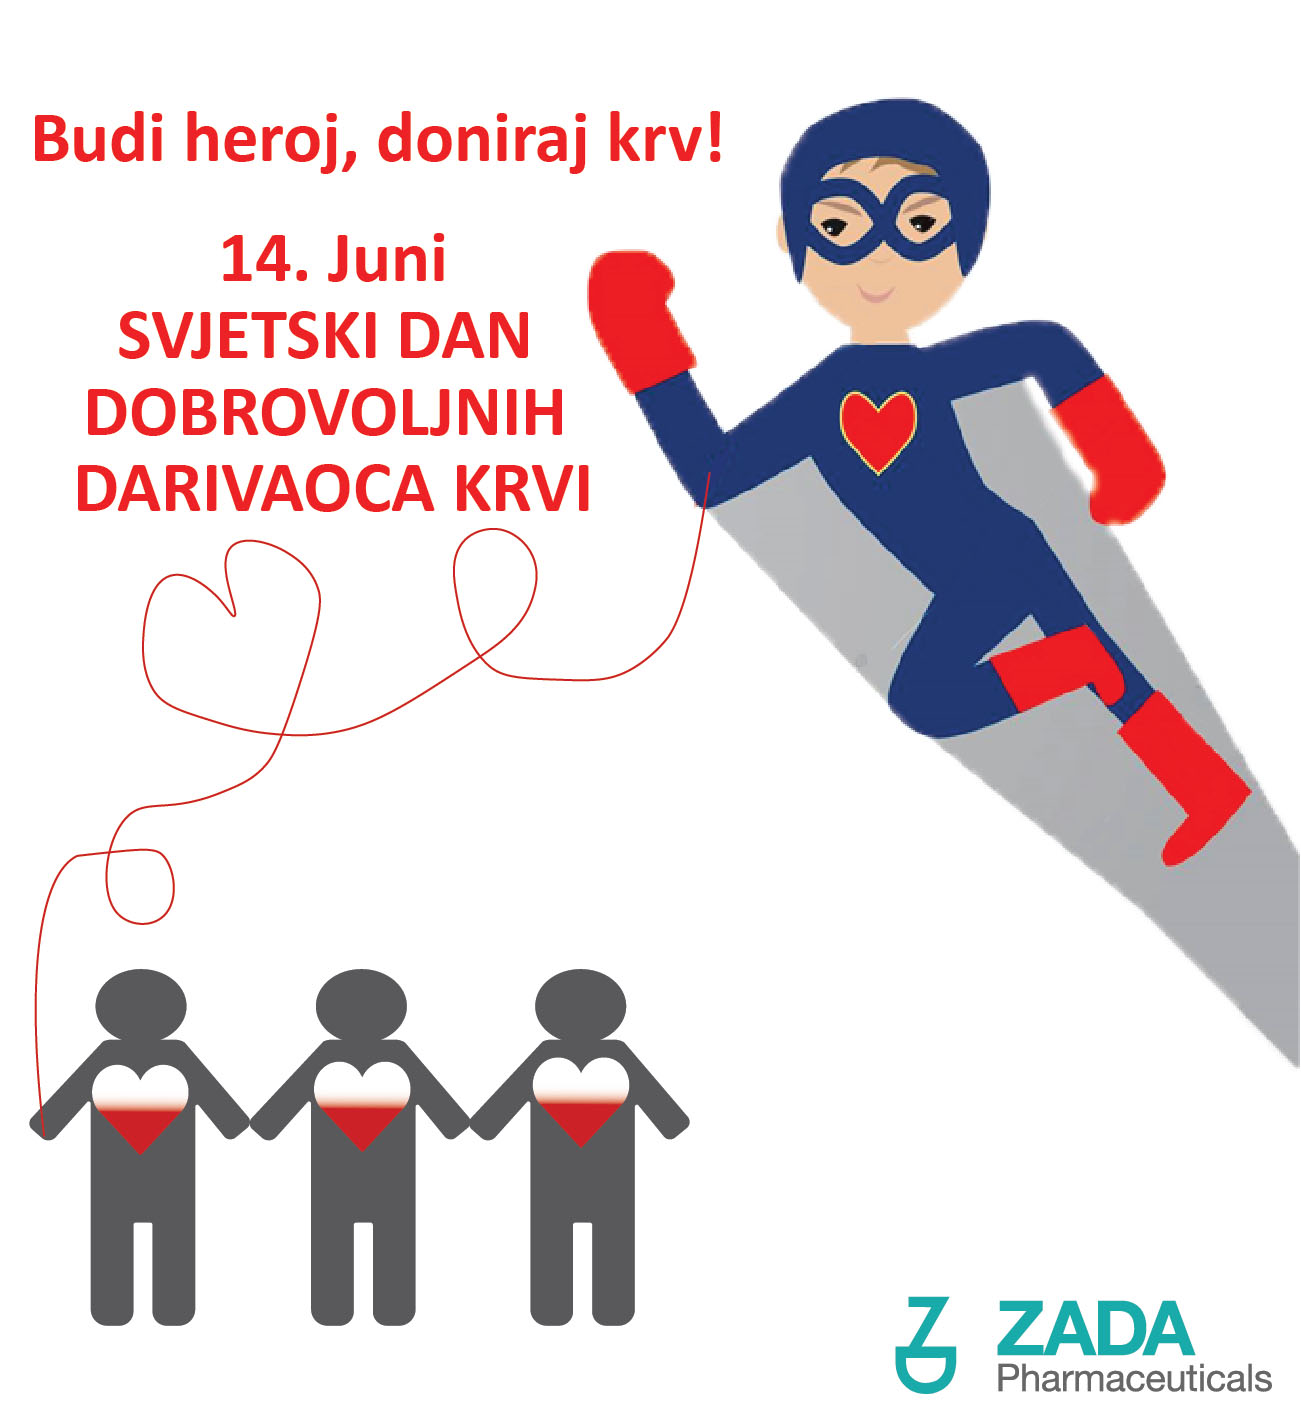 World Blood Donor Day 14.06.